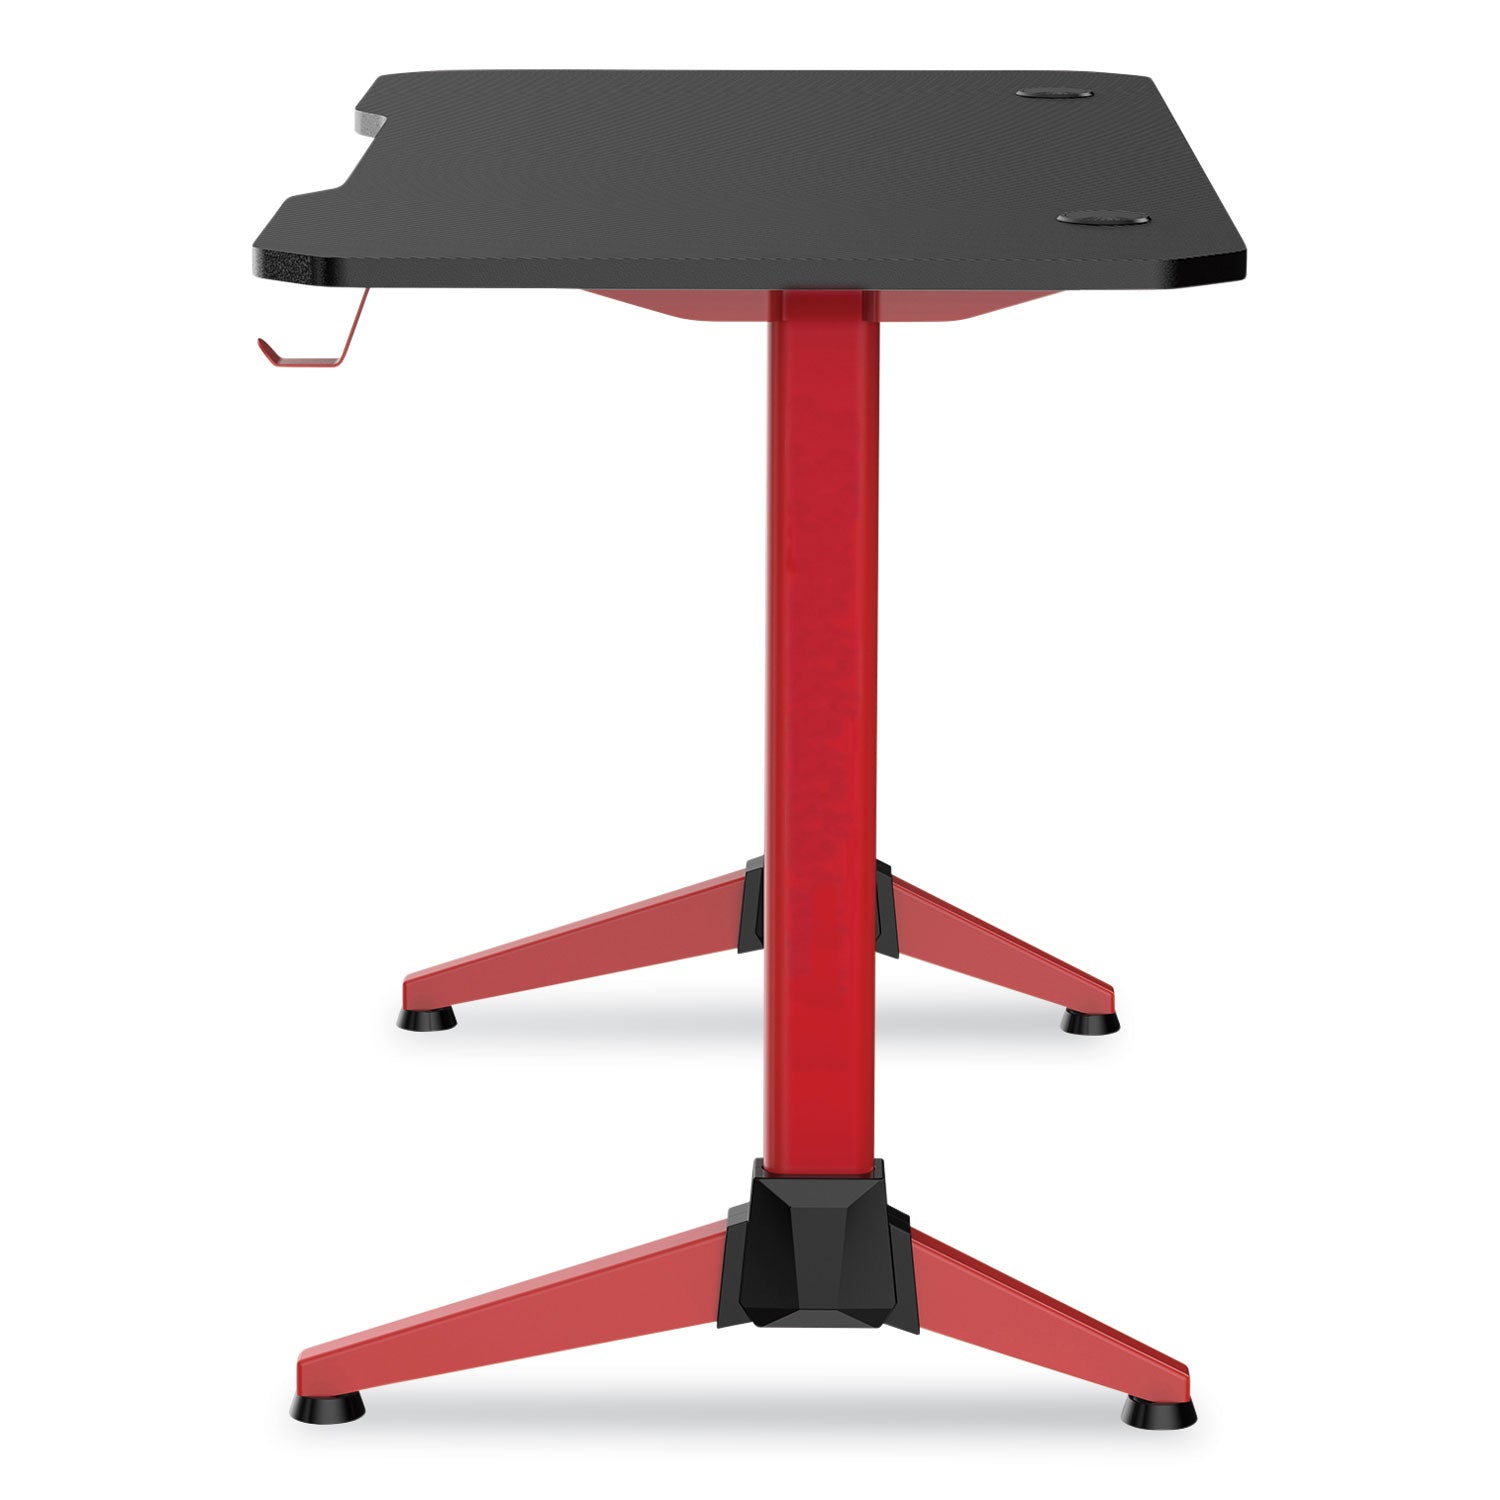 ultimate-computer-gaming-desk-472-x-236-x-295-black-red-ships-in-1-3-business-days_saf5393rd - 3